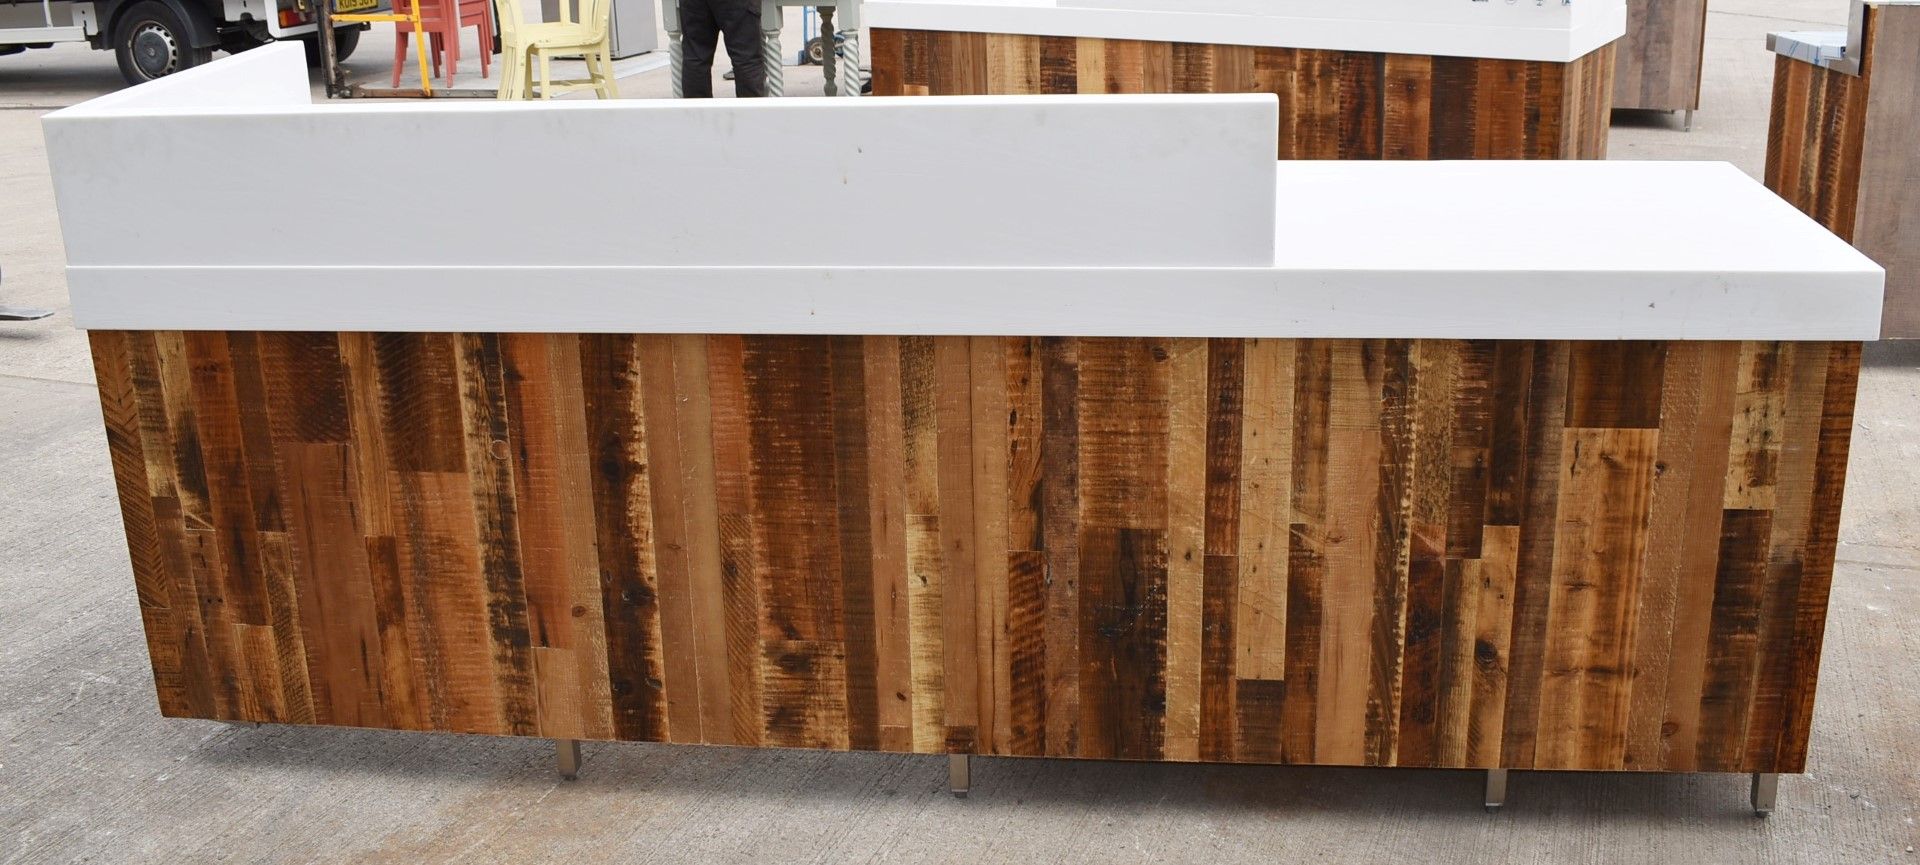 1 x Commercial Coffee Shop Preperation Counter With Natural Wooden Fascia, Hard Wearing Hygenic - Image 17 of 20